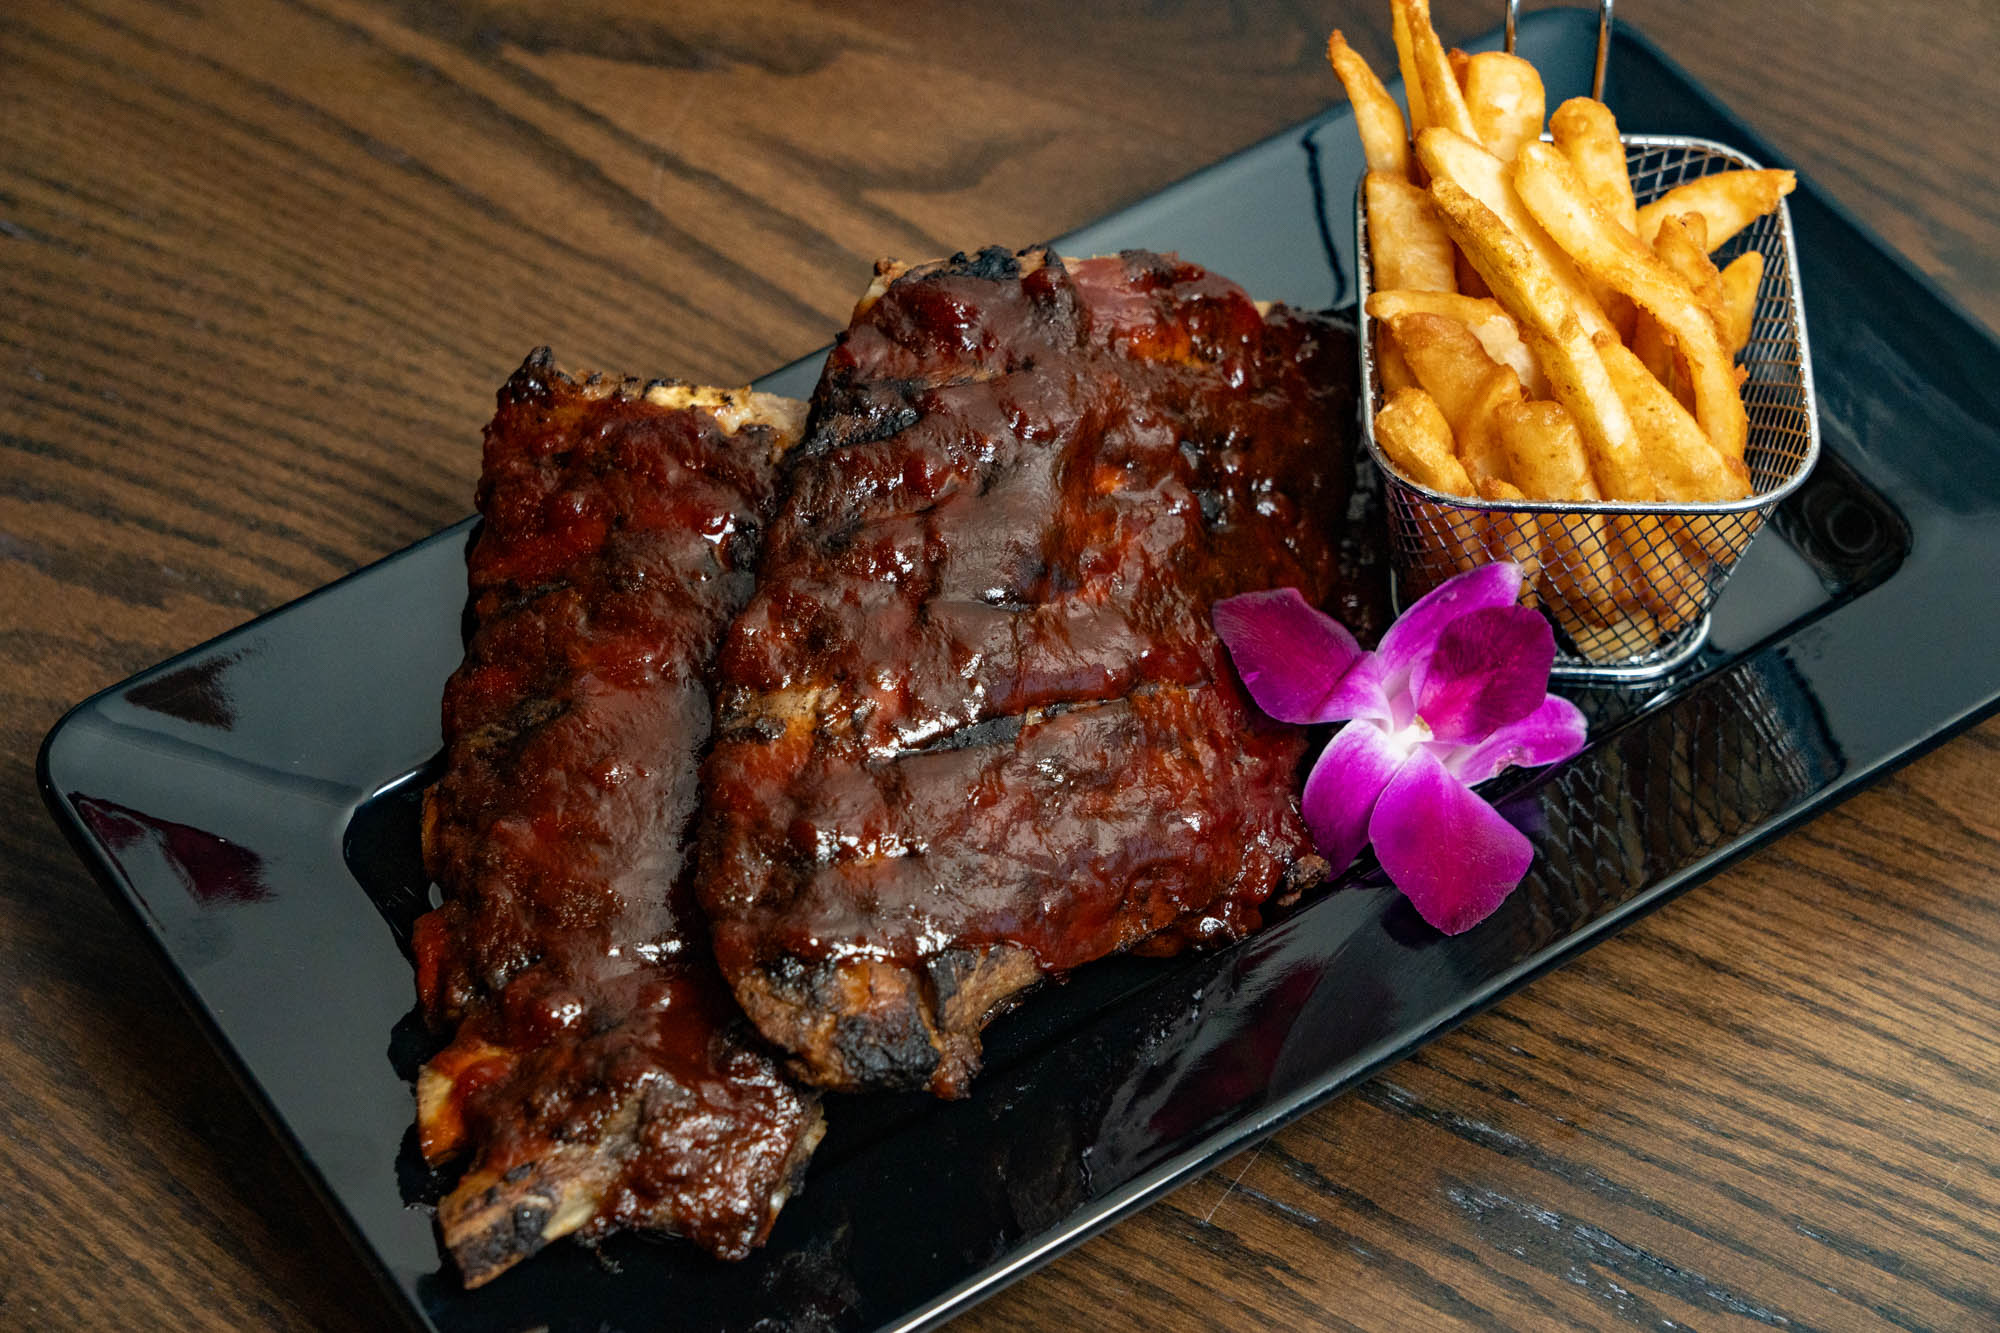 BBQ ribs and fries